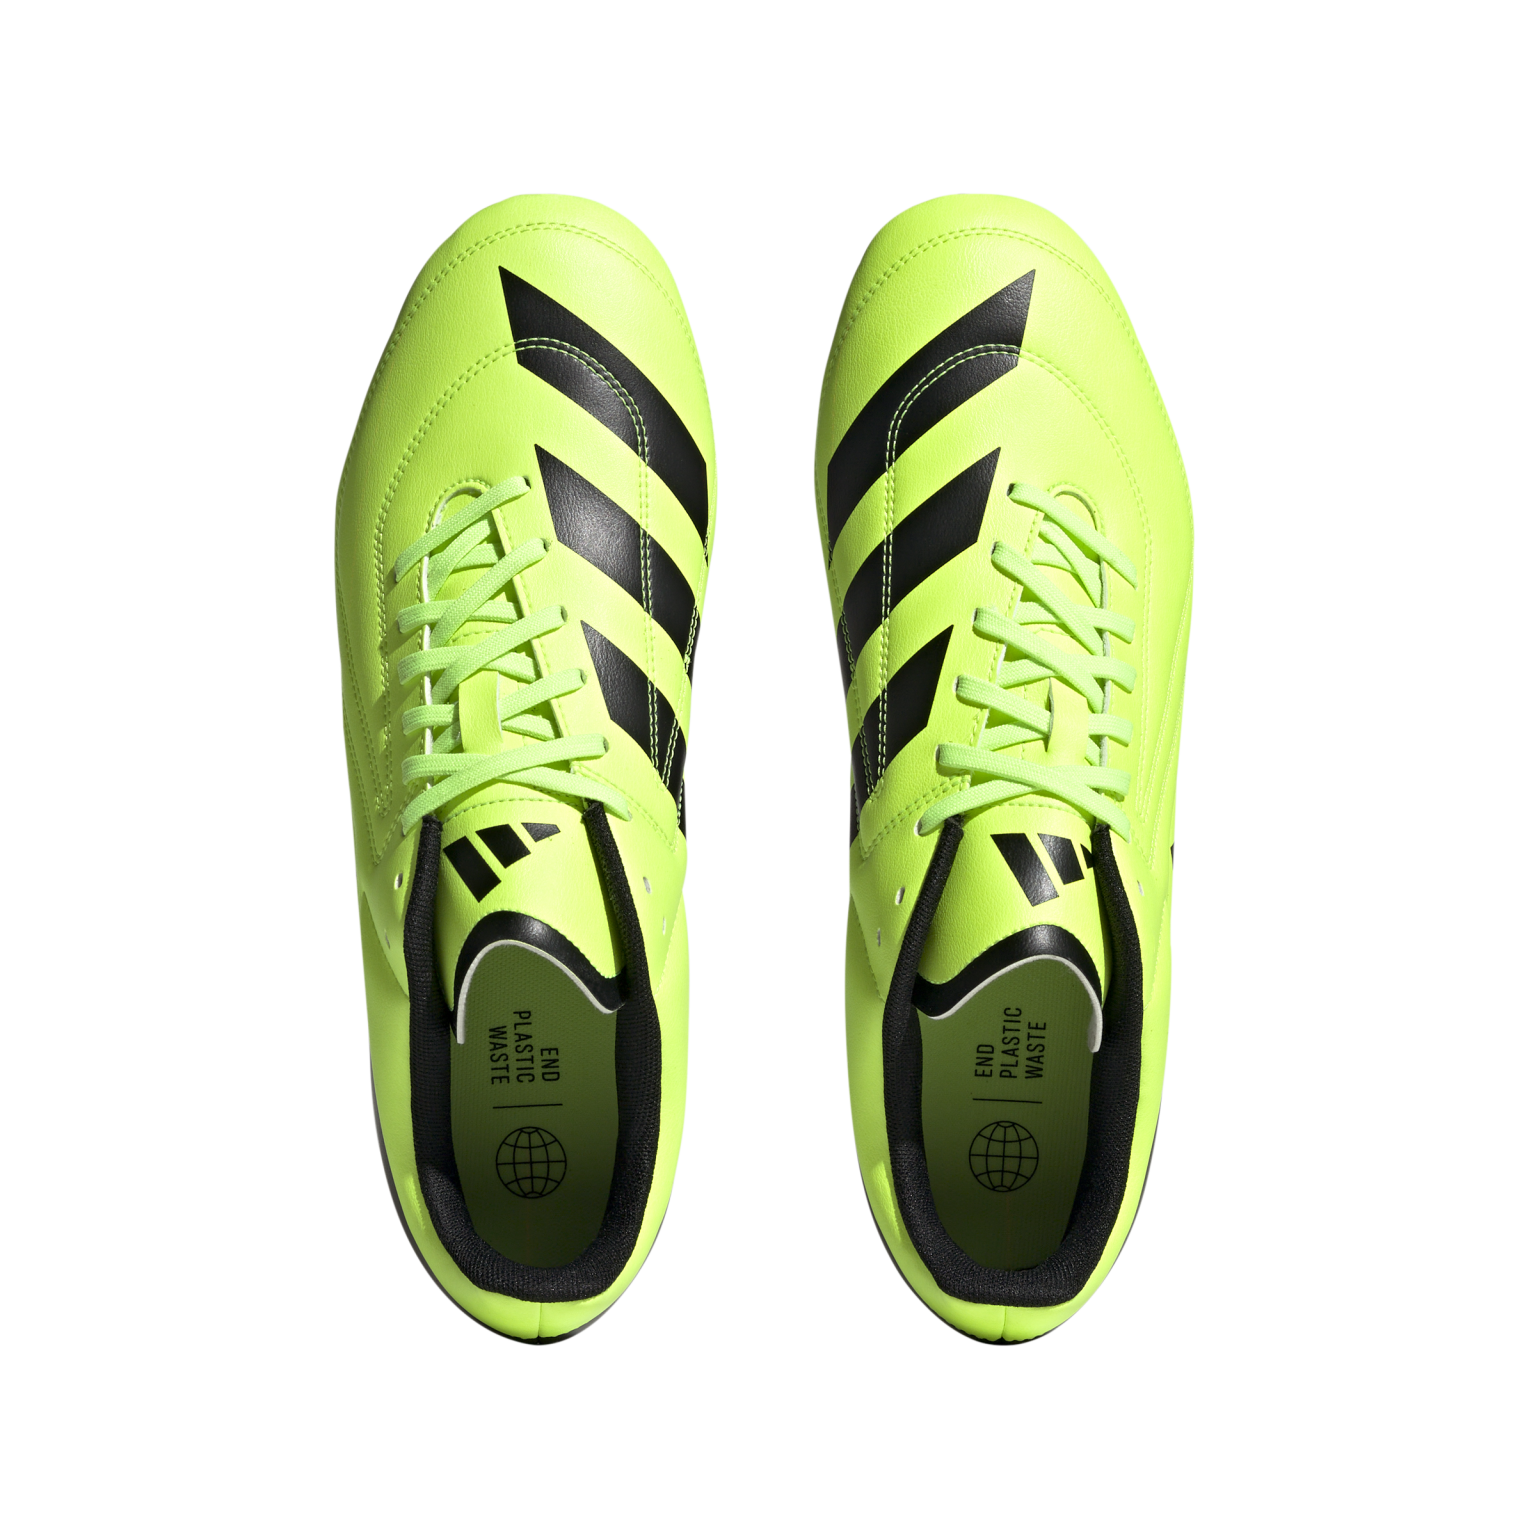 adidas RS15 Rugby Boots (SG) - Yellow | The Rugby Shop